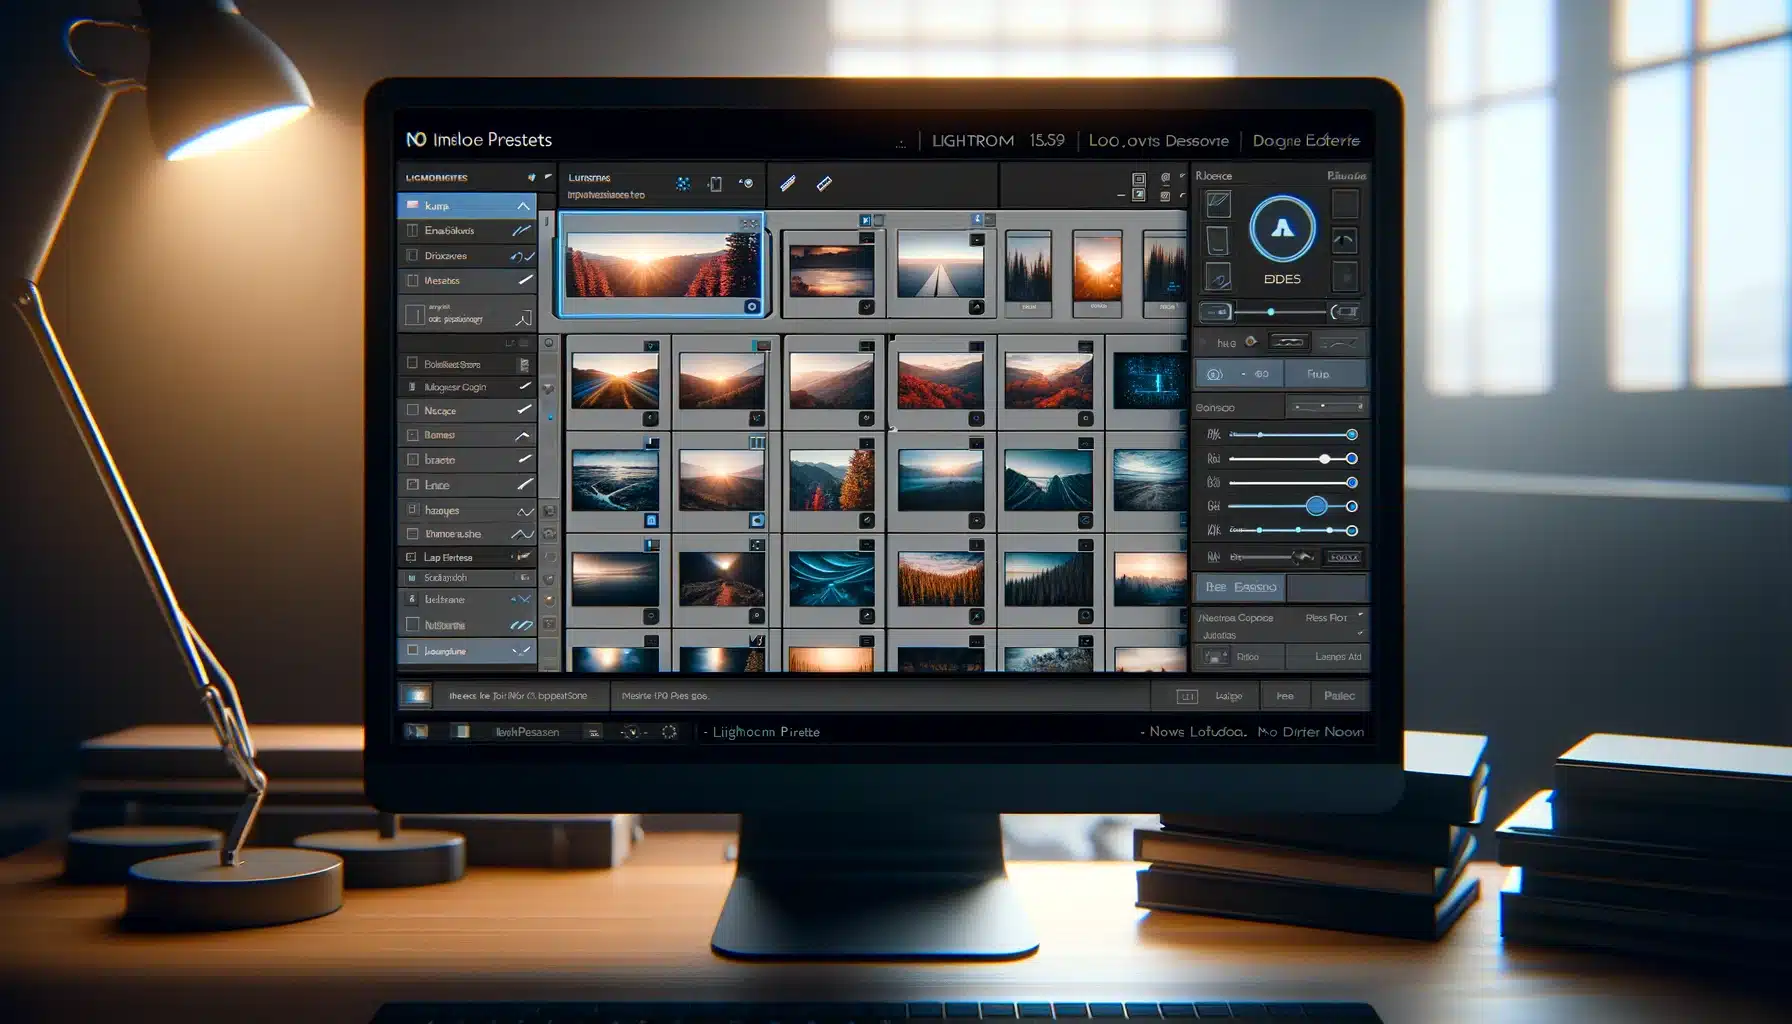 Lightroom interface showing the presets panel and installation process